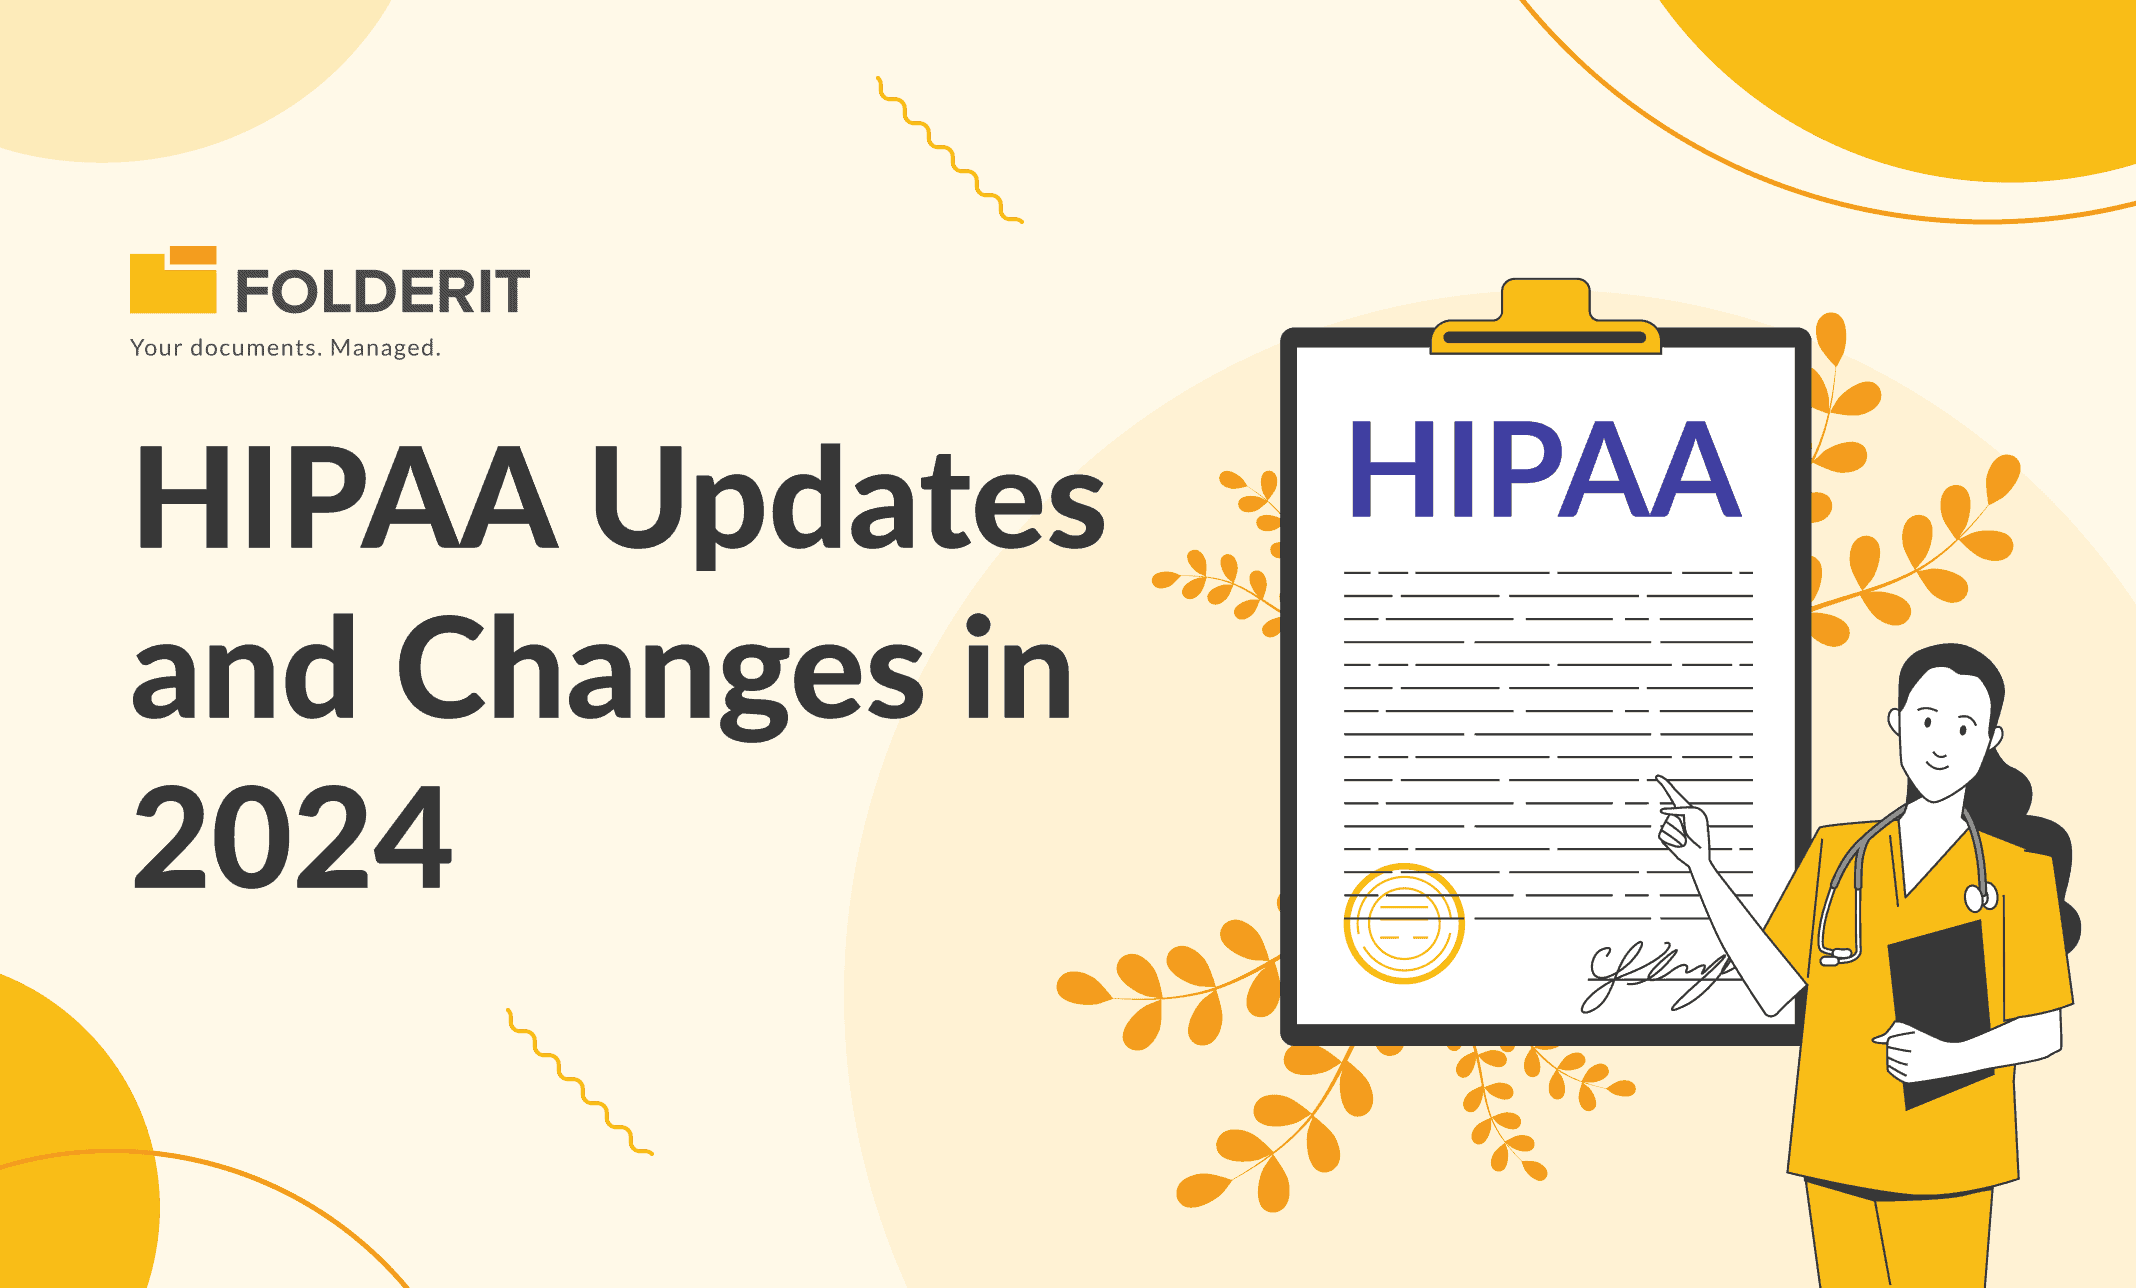 HIPAA Updates and Changes in 2024